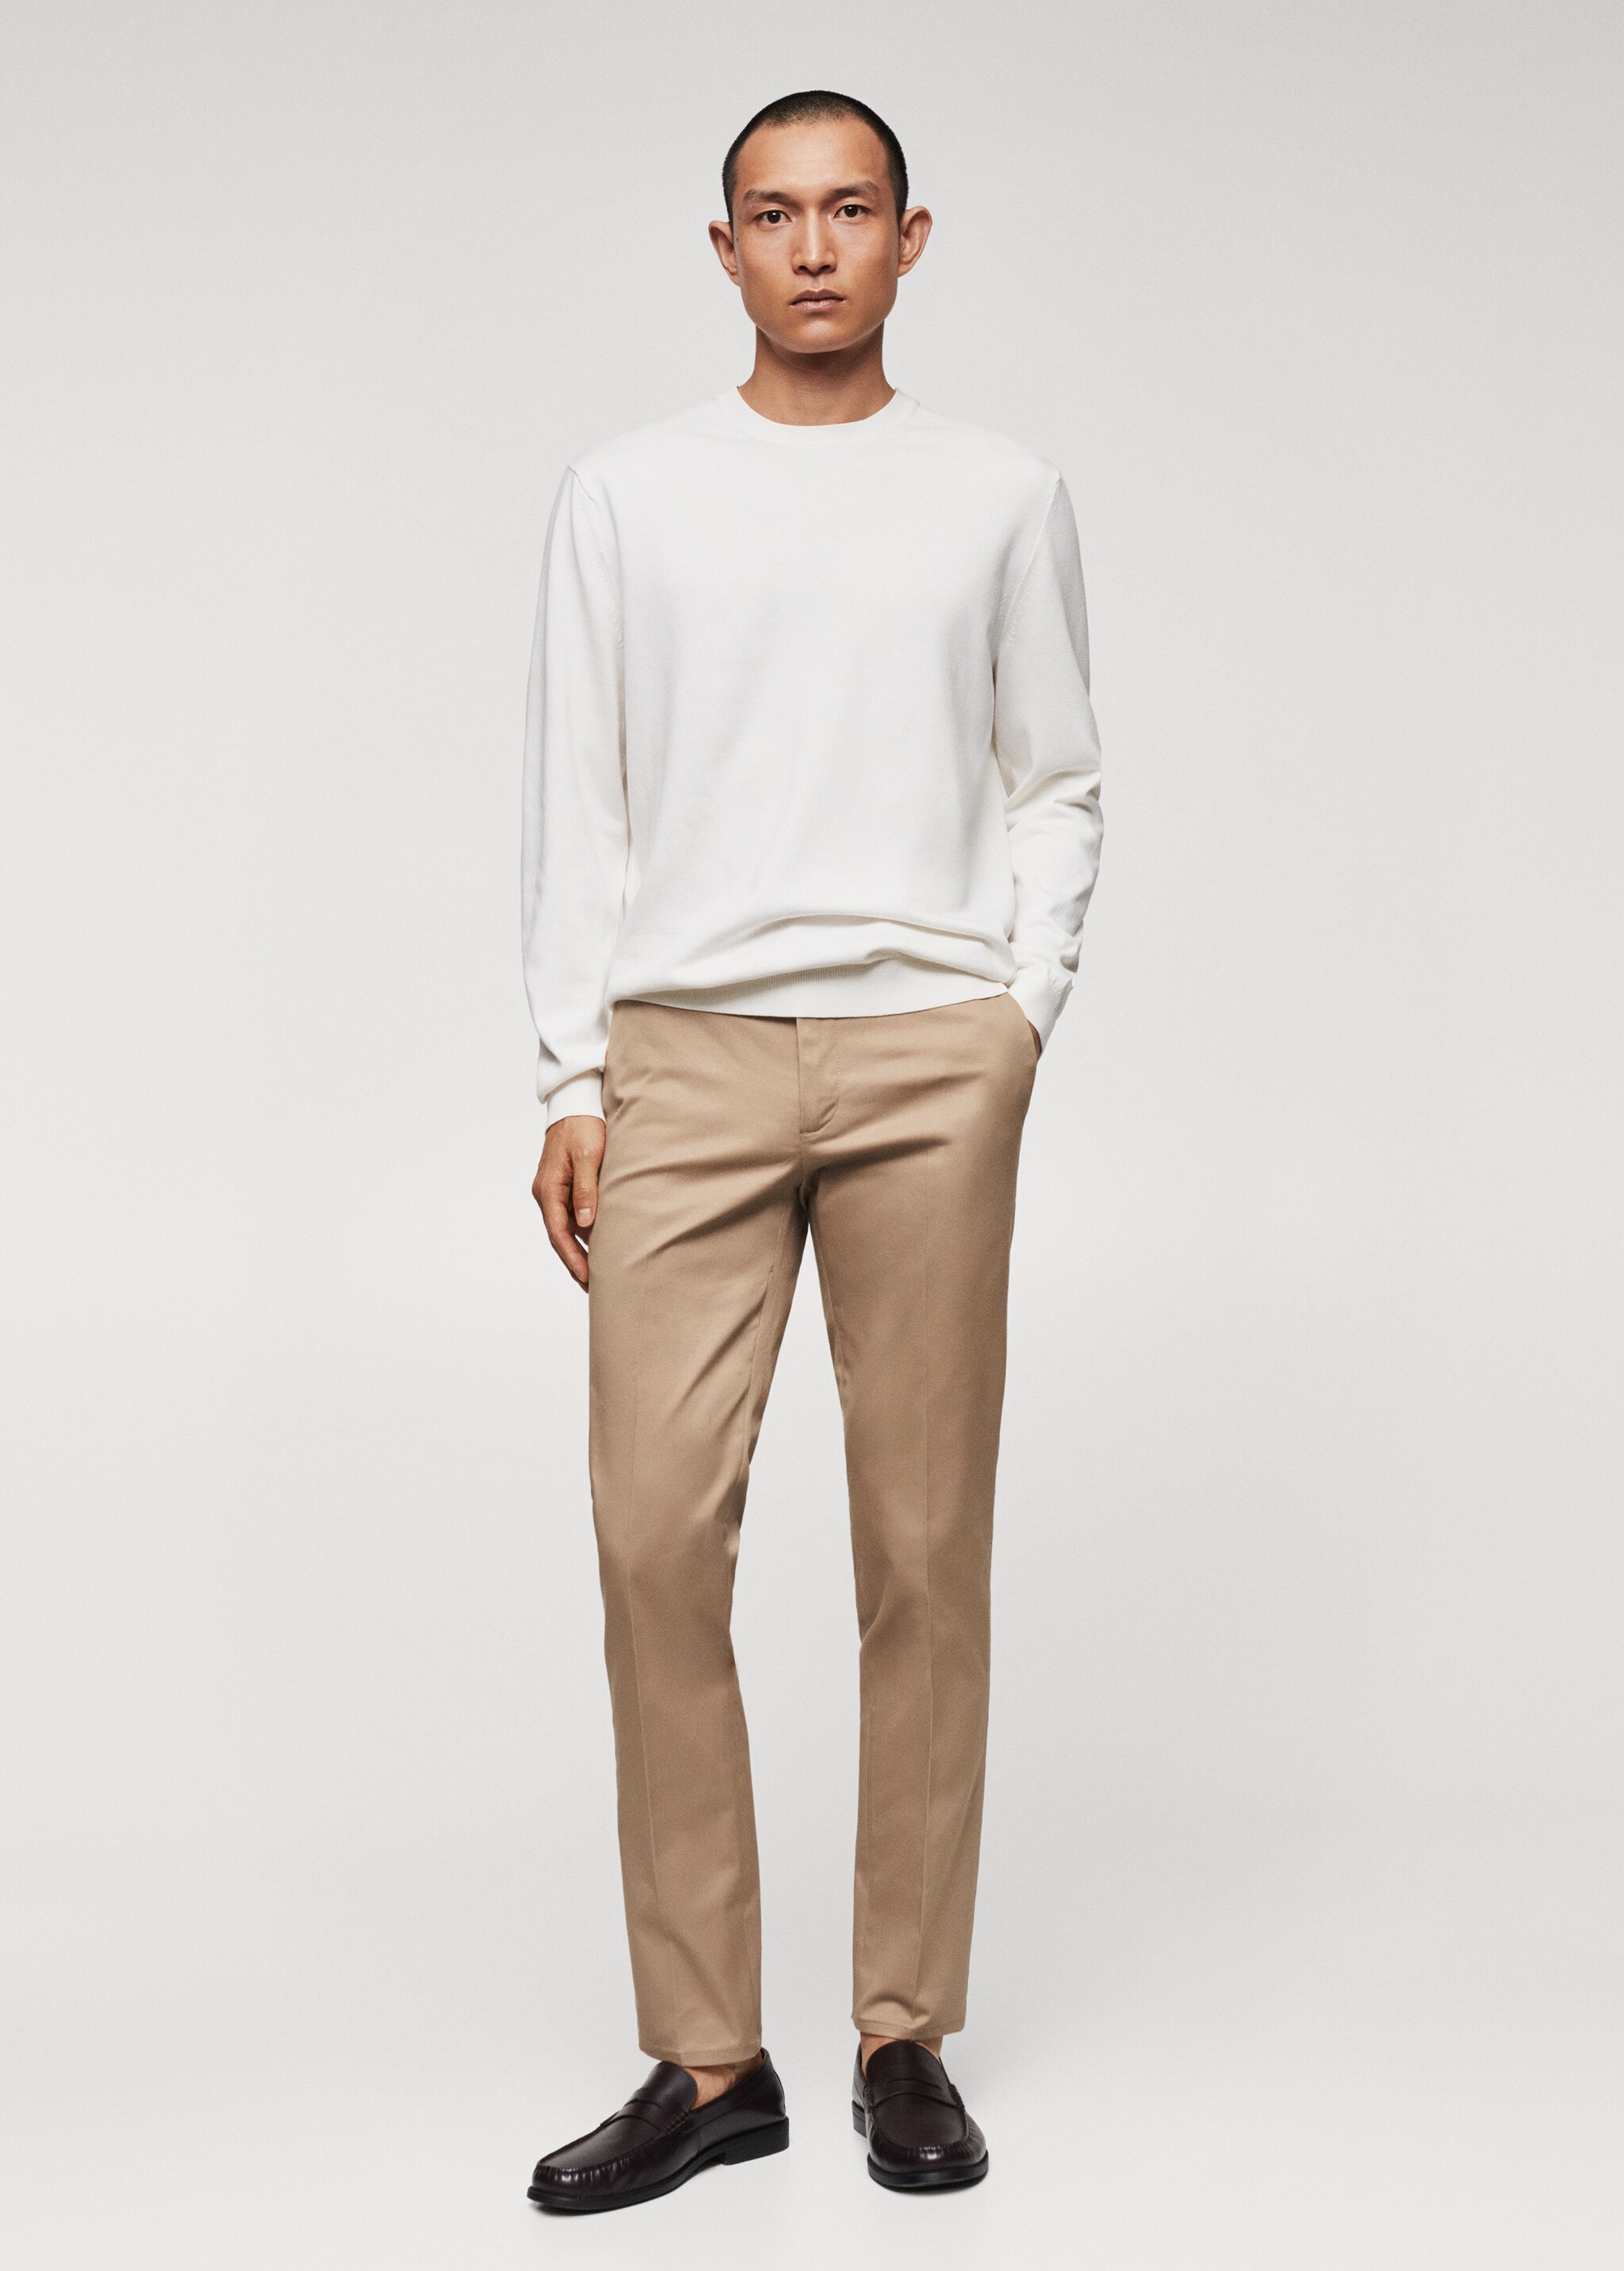 Slim fit chino trousers - General plane